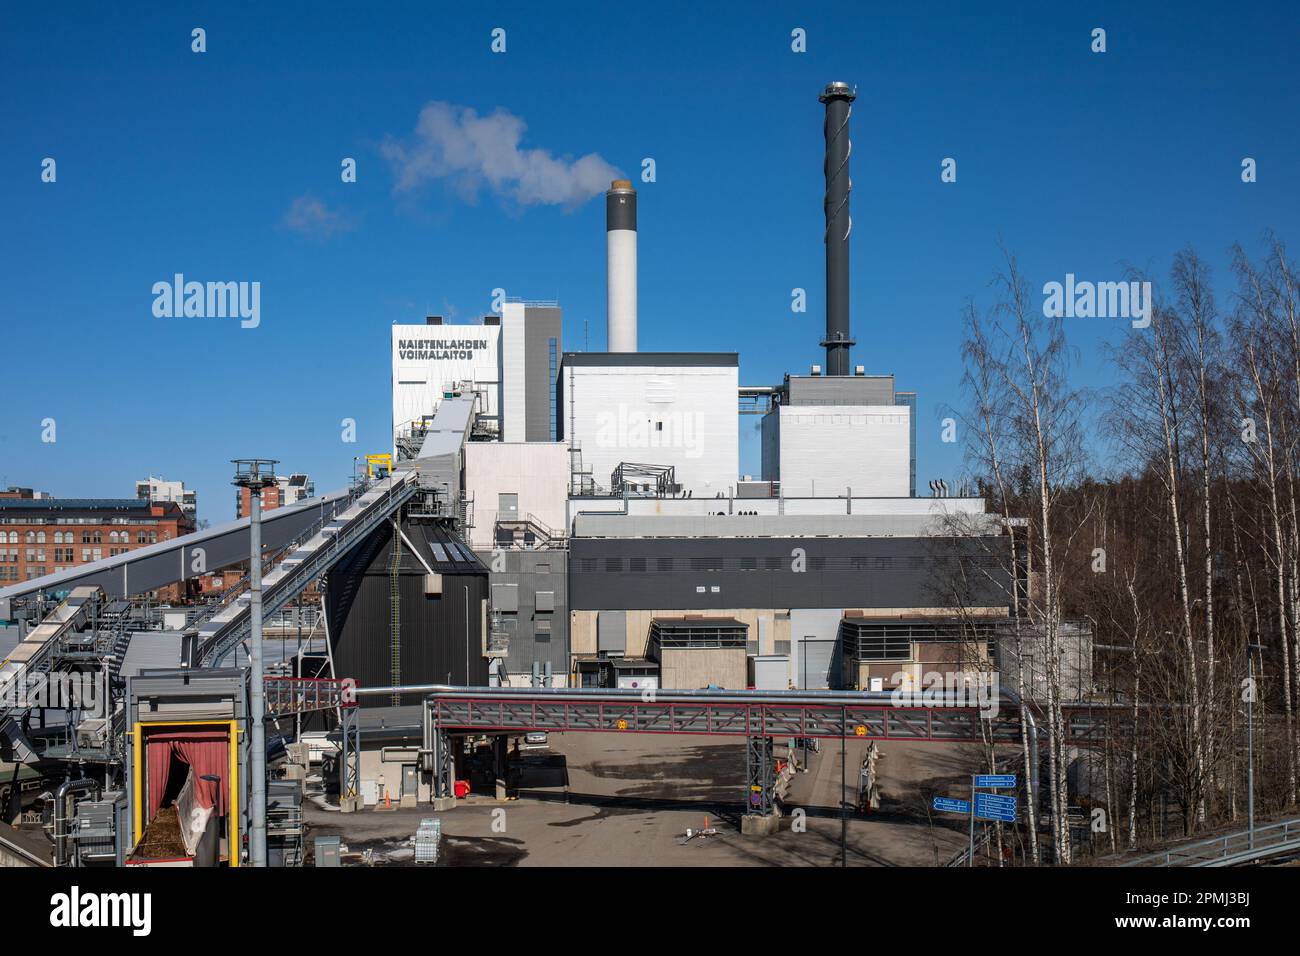 Naistenlahden voimalaitos or Naistenlahti Power Plant against clear blue sky on a sunny spring day in Tampere, Finland Stock Photo